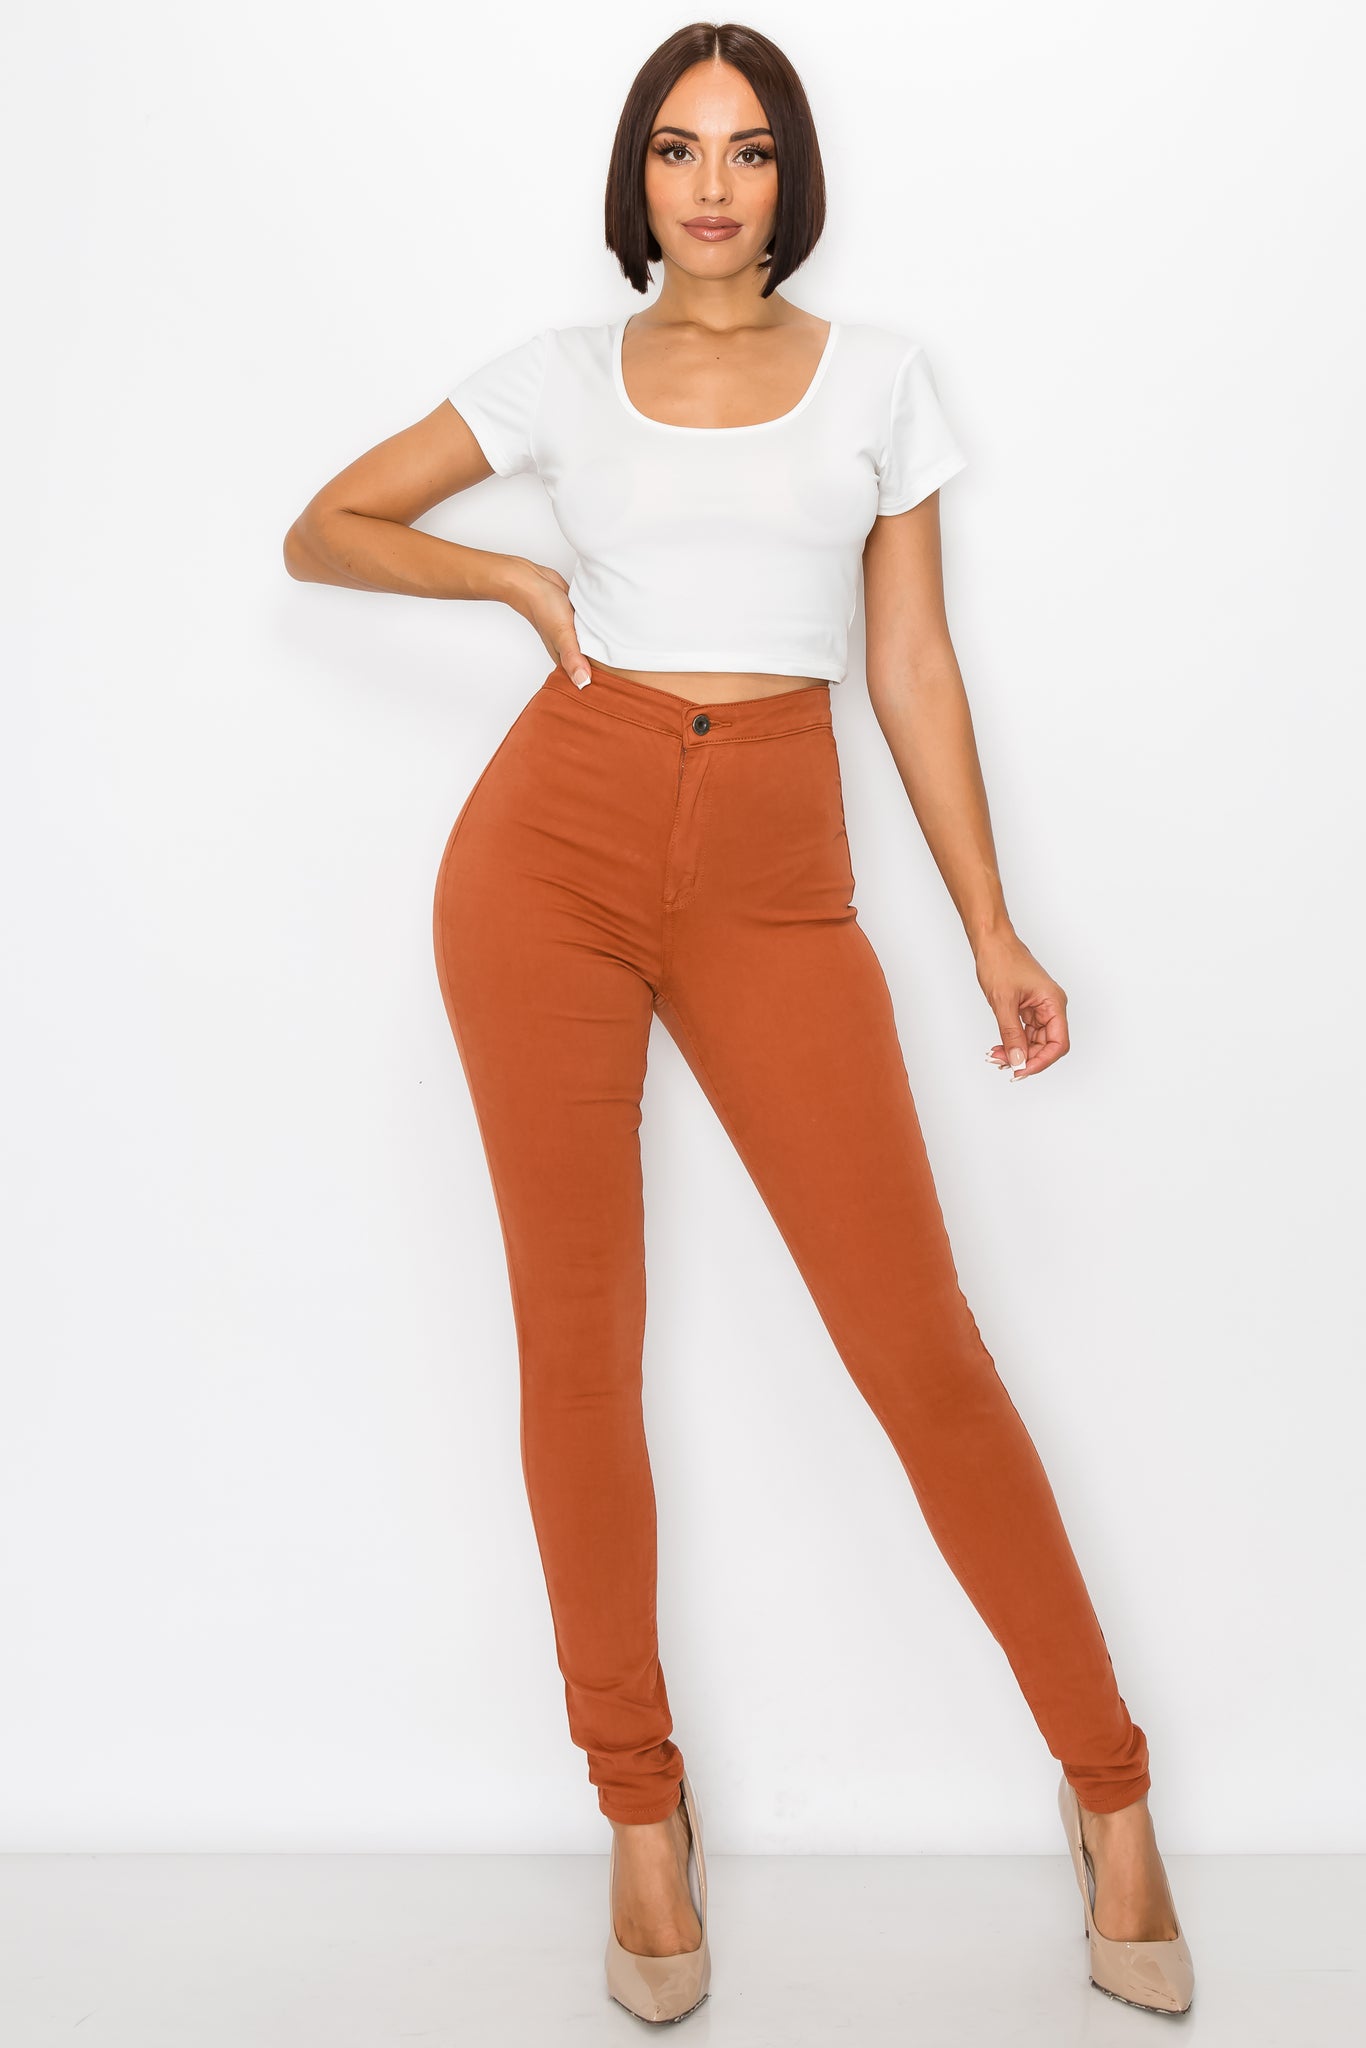 1166 Women's Super High Waisted Color Skinny Jeans